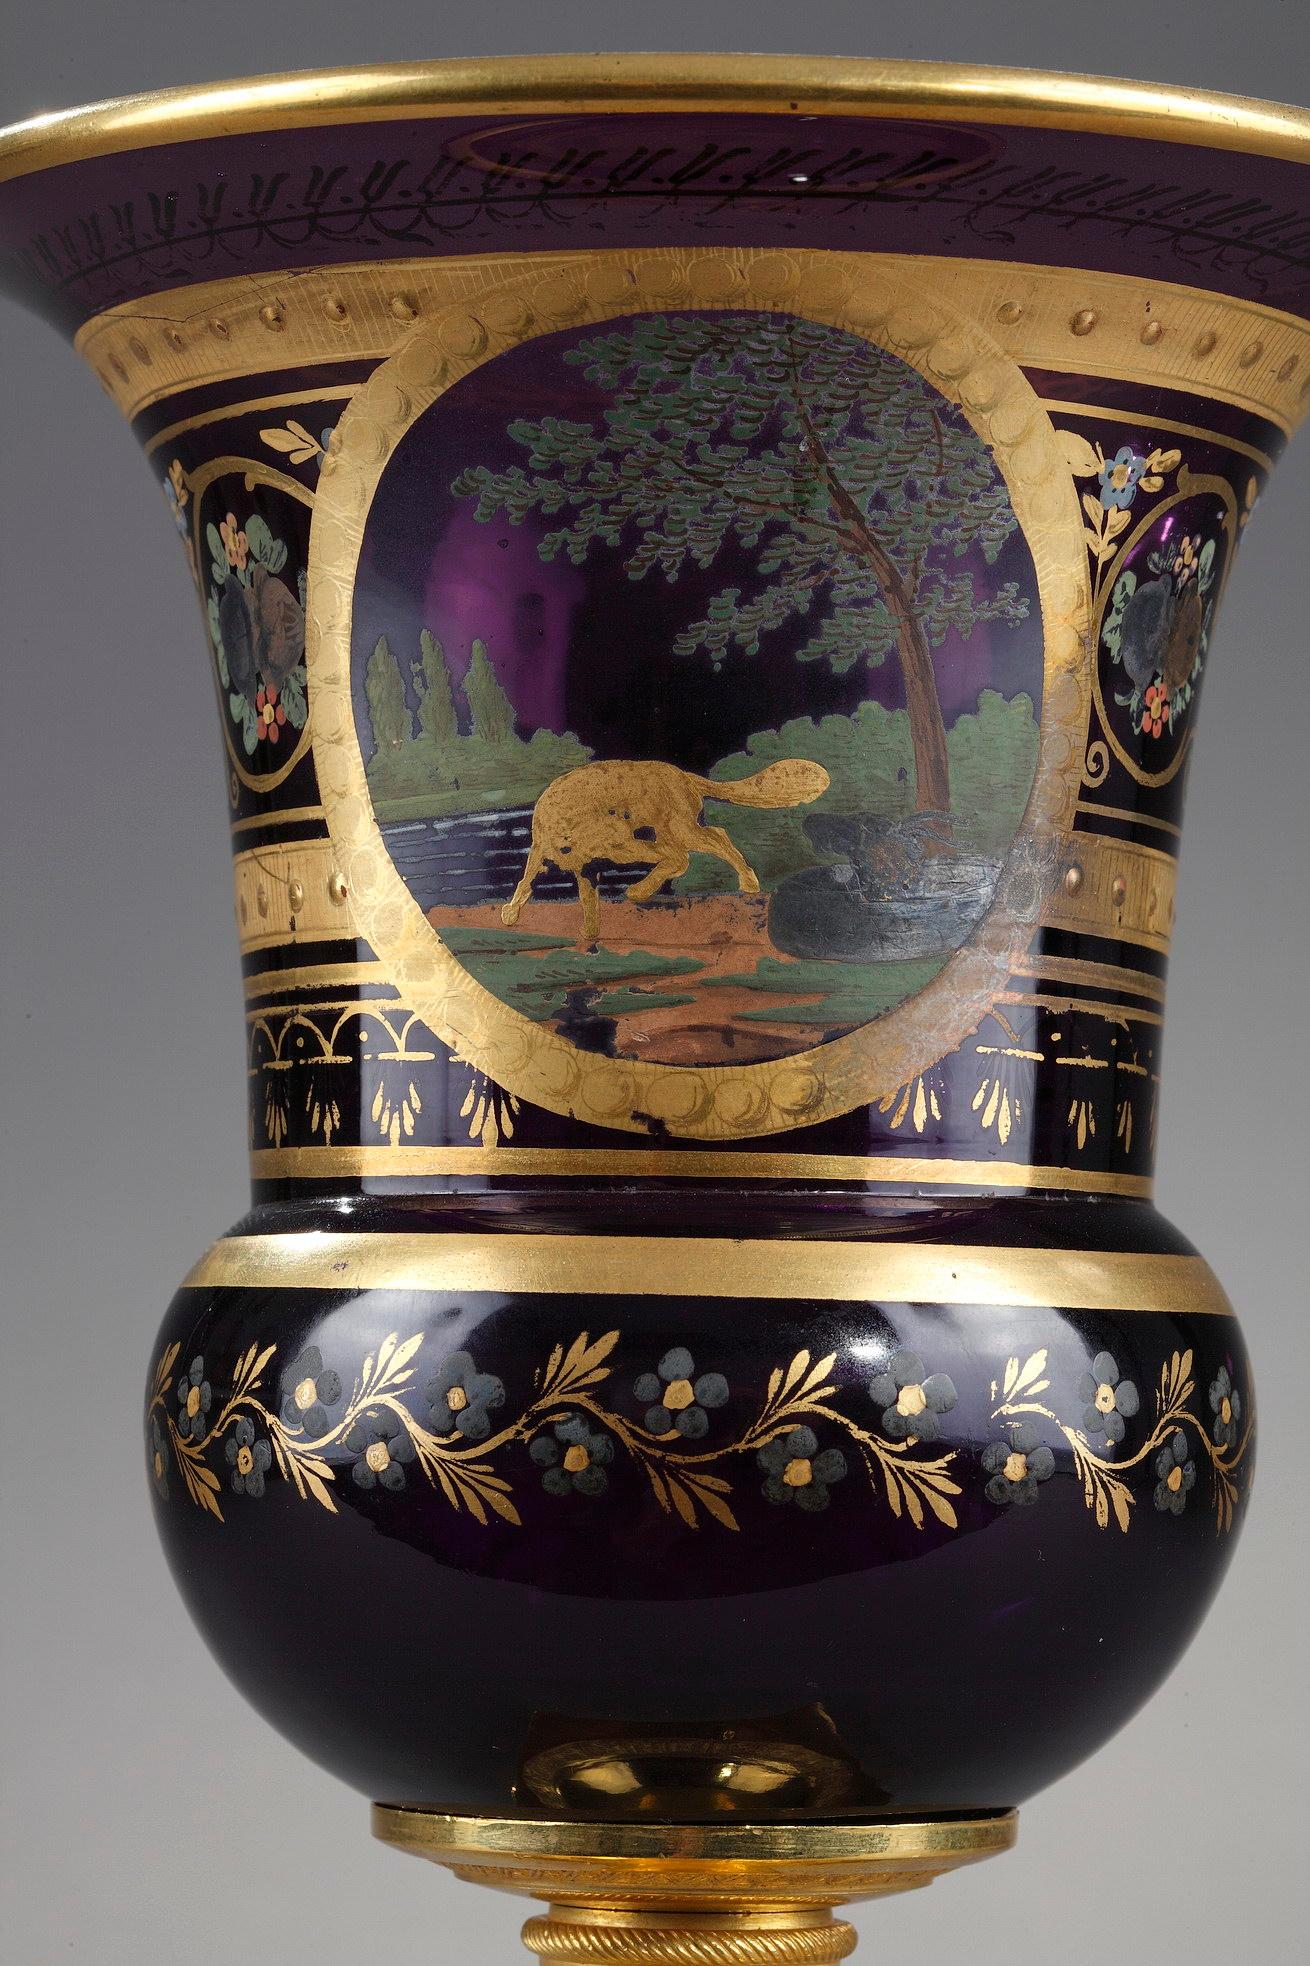 A very elegant amethyst Medicis vase. It consist of a gilded bronze pedestal base, adorned finely sculpted with foliage.The base supports the opaline which is decorated with banding, friezes of palmettes, a garland of blue flowers, and multicolored